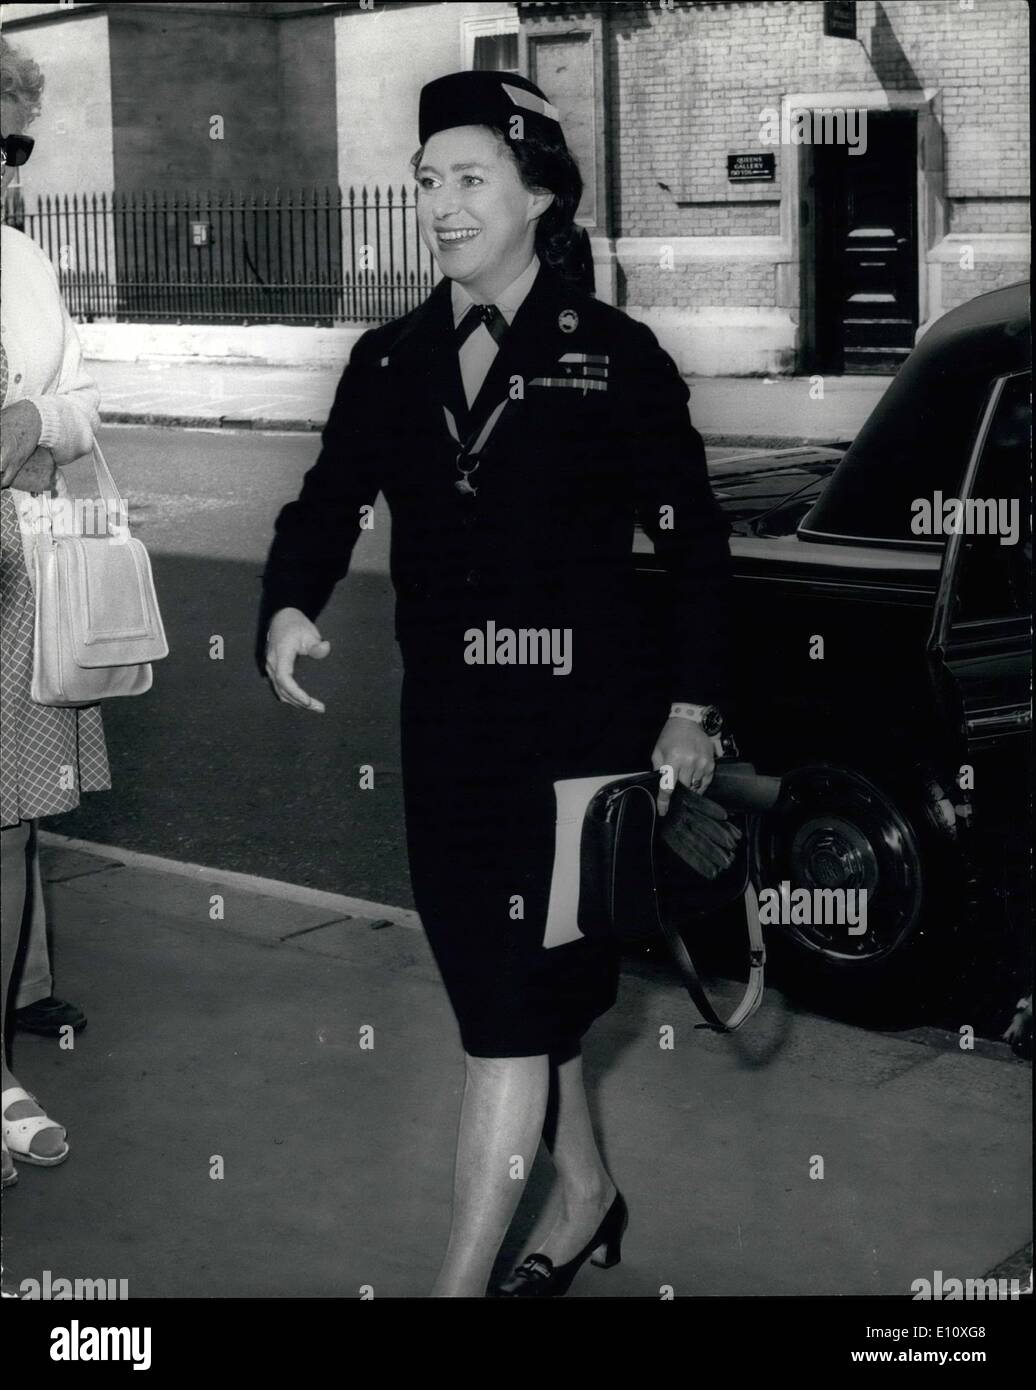 May 16, 1974 - May 16th, 1974 Princess Margaret presides at Girl Guides Association Council meeting. Photo Shows: Princess Margaret, President of the Girl Guides Association, arriving for a closed session of the Council at the Commonwealth Headquarters, Buckingham Palace Road, today. Stock Photo